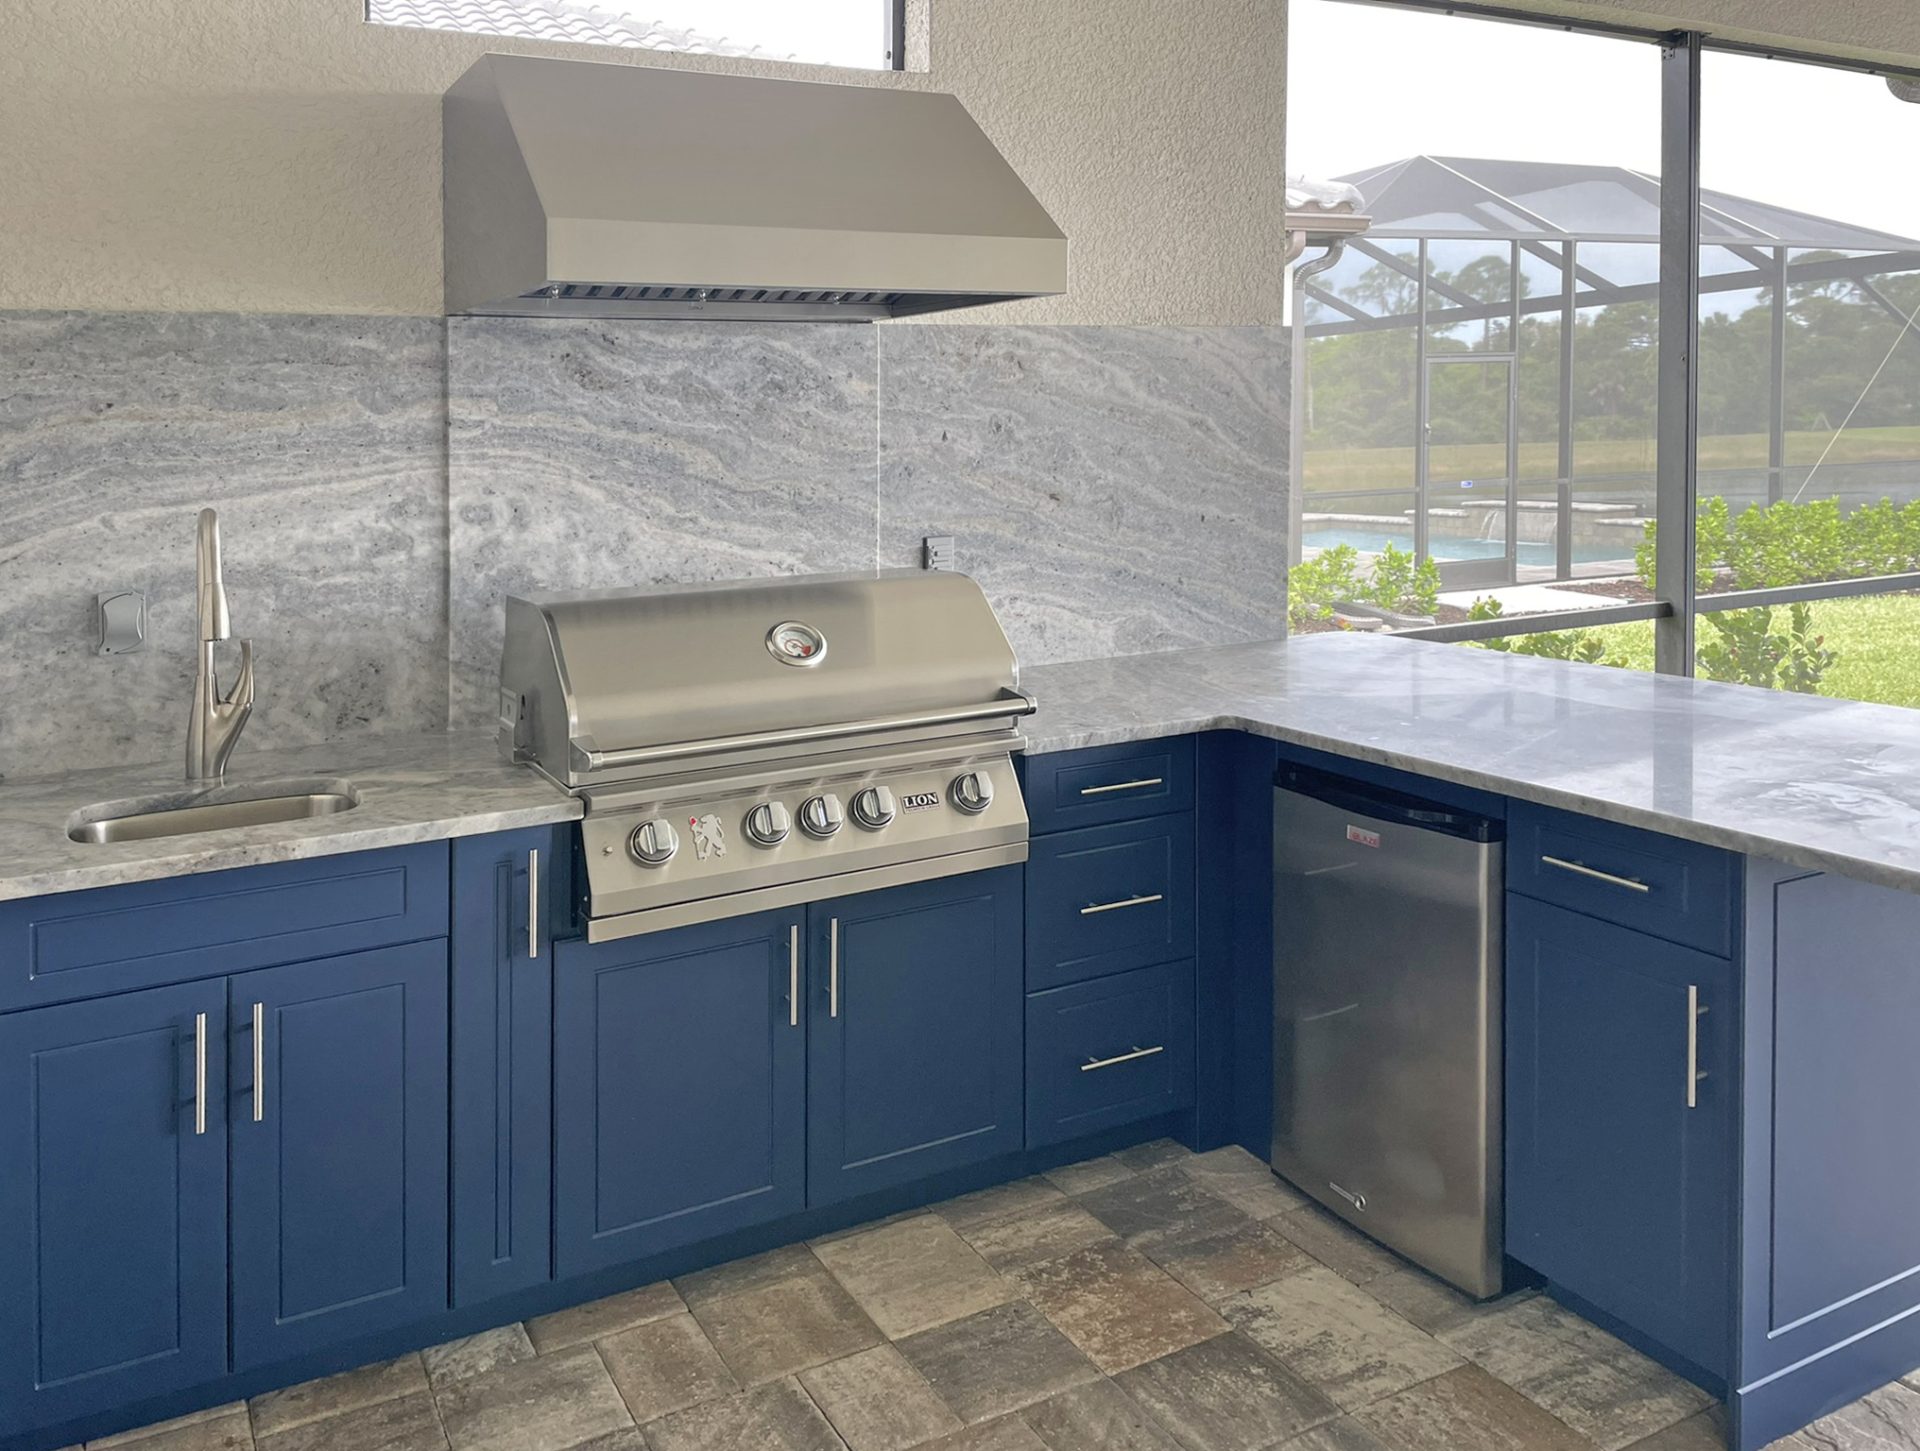 OUTDOOR KITCHEN 35. Custom outdoor kitchen in Lakewood Ranch, FL. Kitchen features indigo blue, v-groove style cabinets. Appliances include Lion grill, Cypress outdoor hood, Blaze stainless front refrigerator and stainless bar pulls.